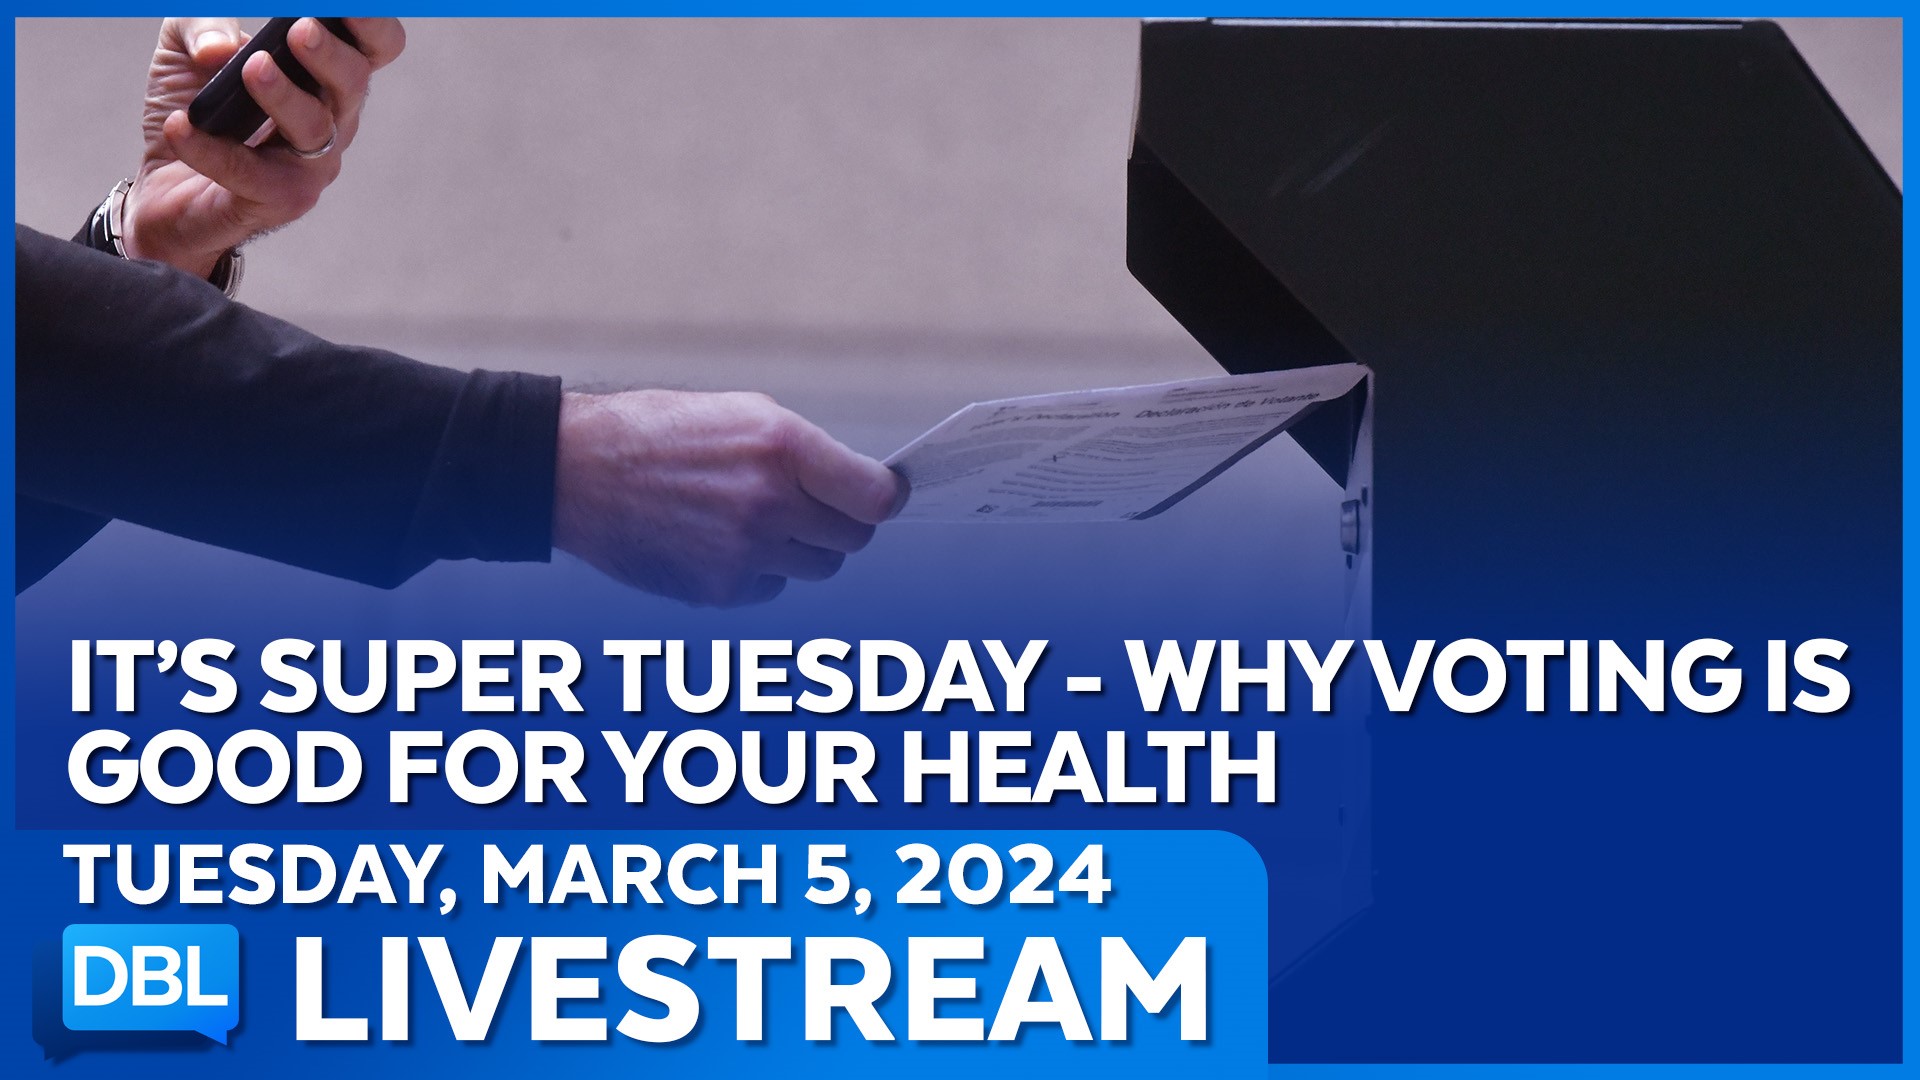 It's Super Tuesday, Why Voting Is Good For Your Health - DBL | Mar. 5, 2024